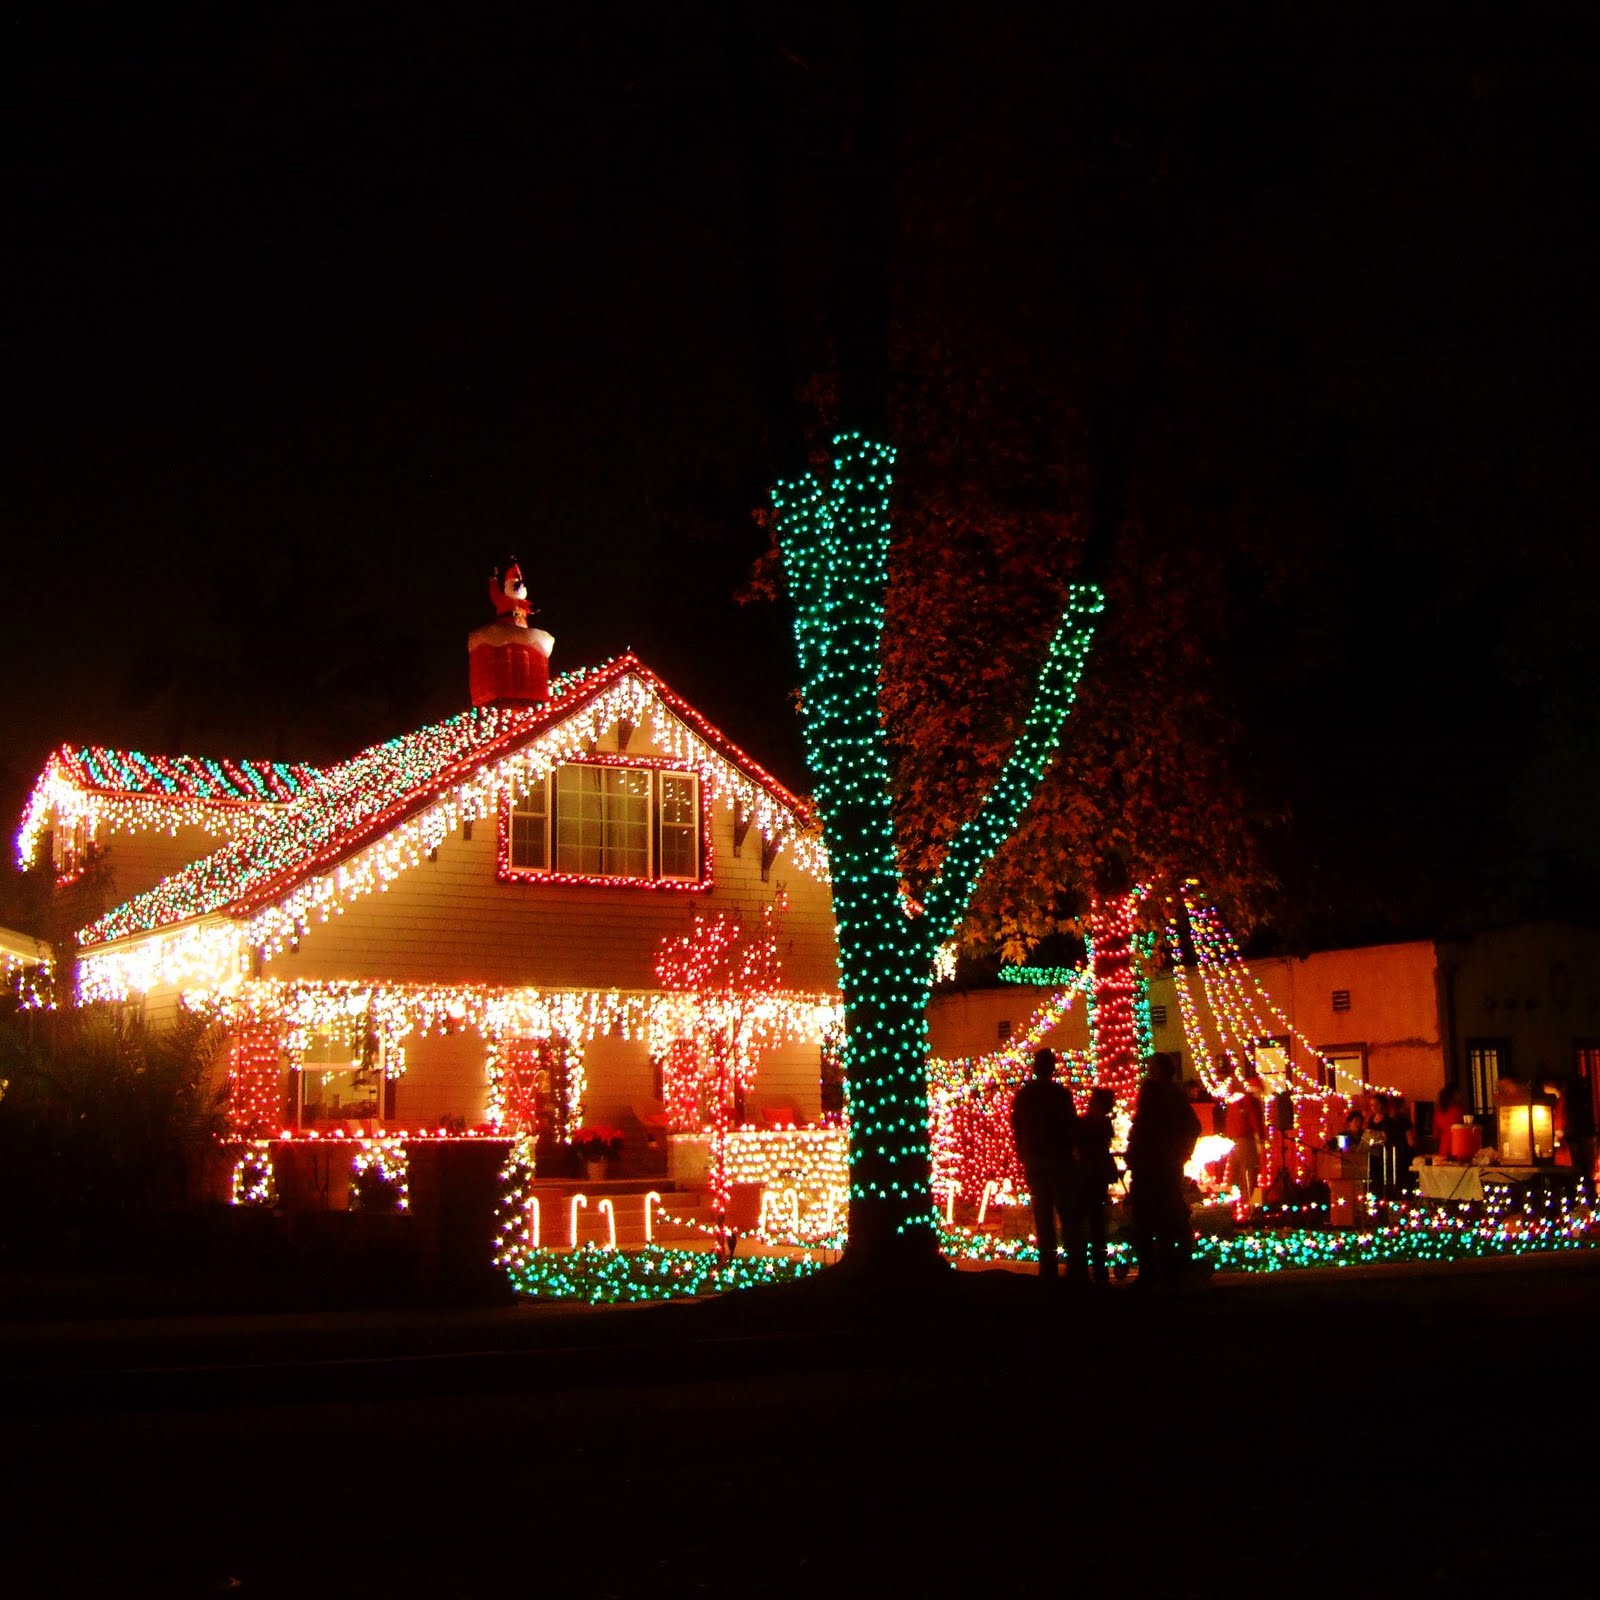 [most+festive+house+in+South+Pas+2009.jpg]